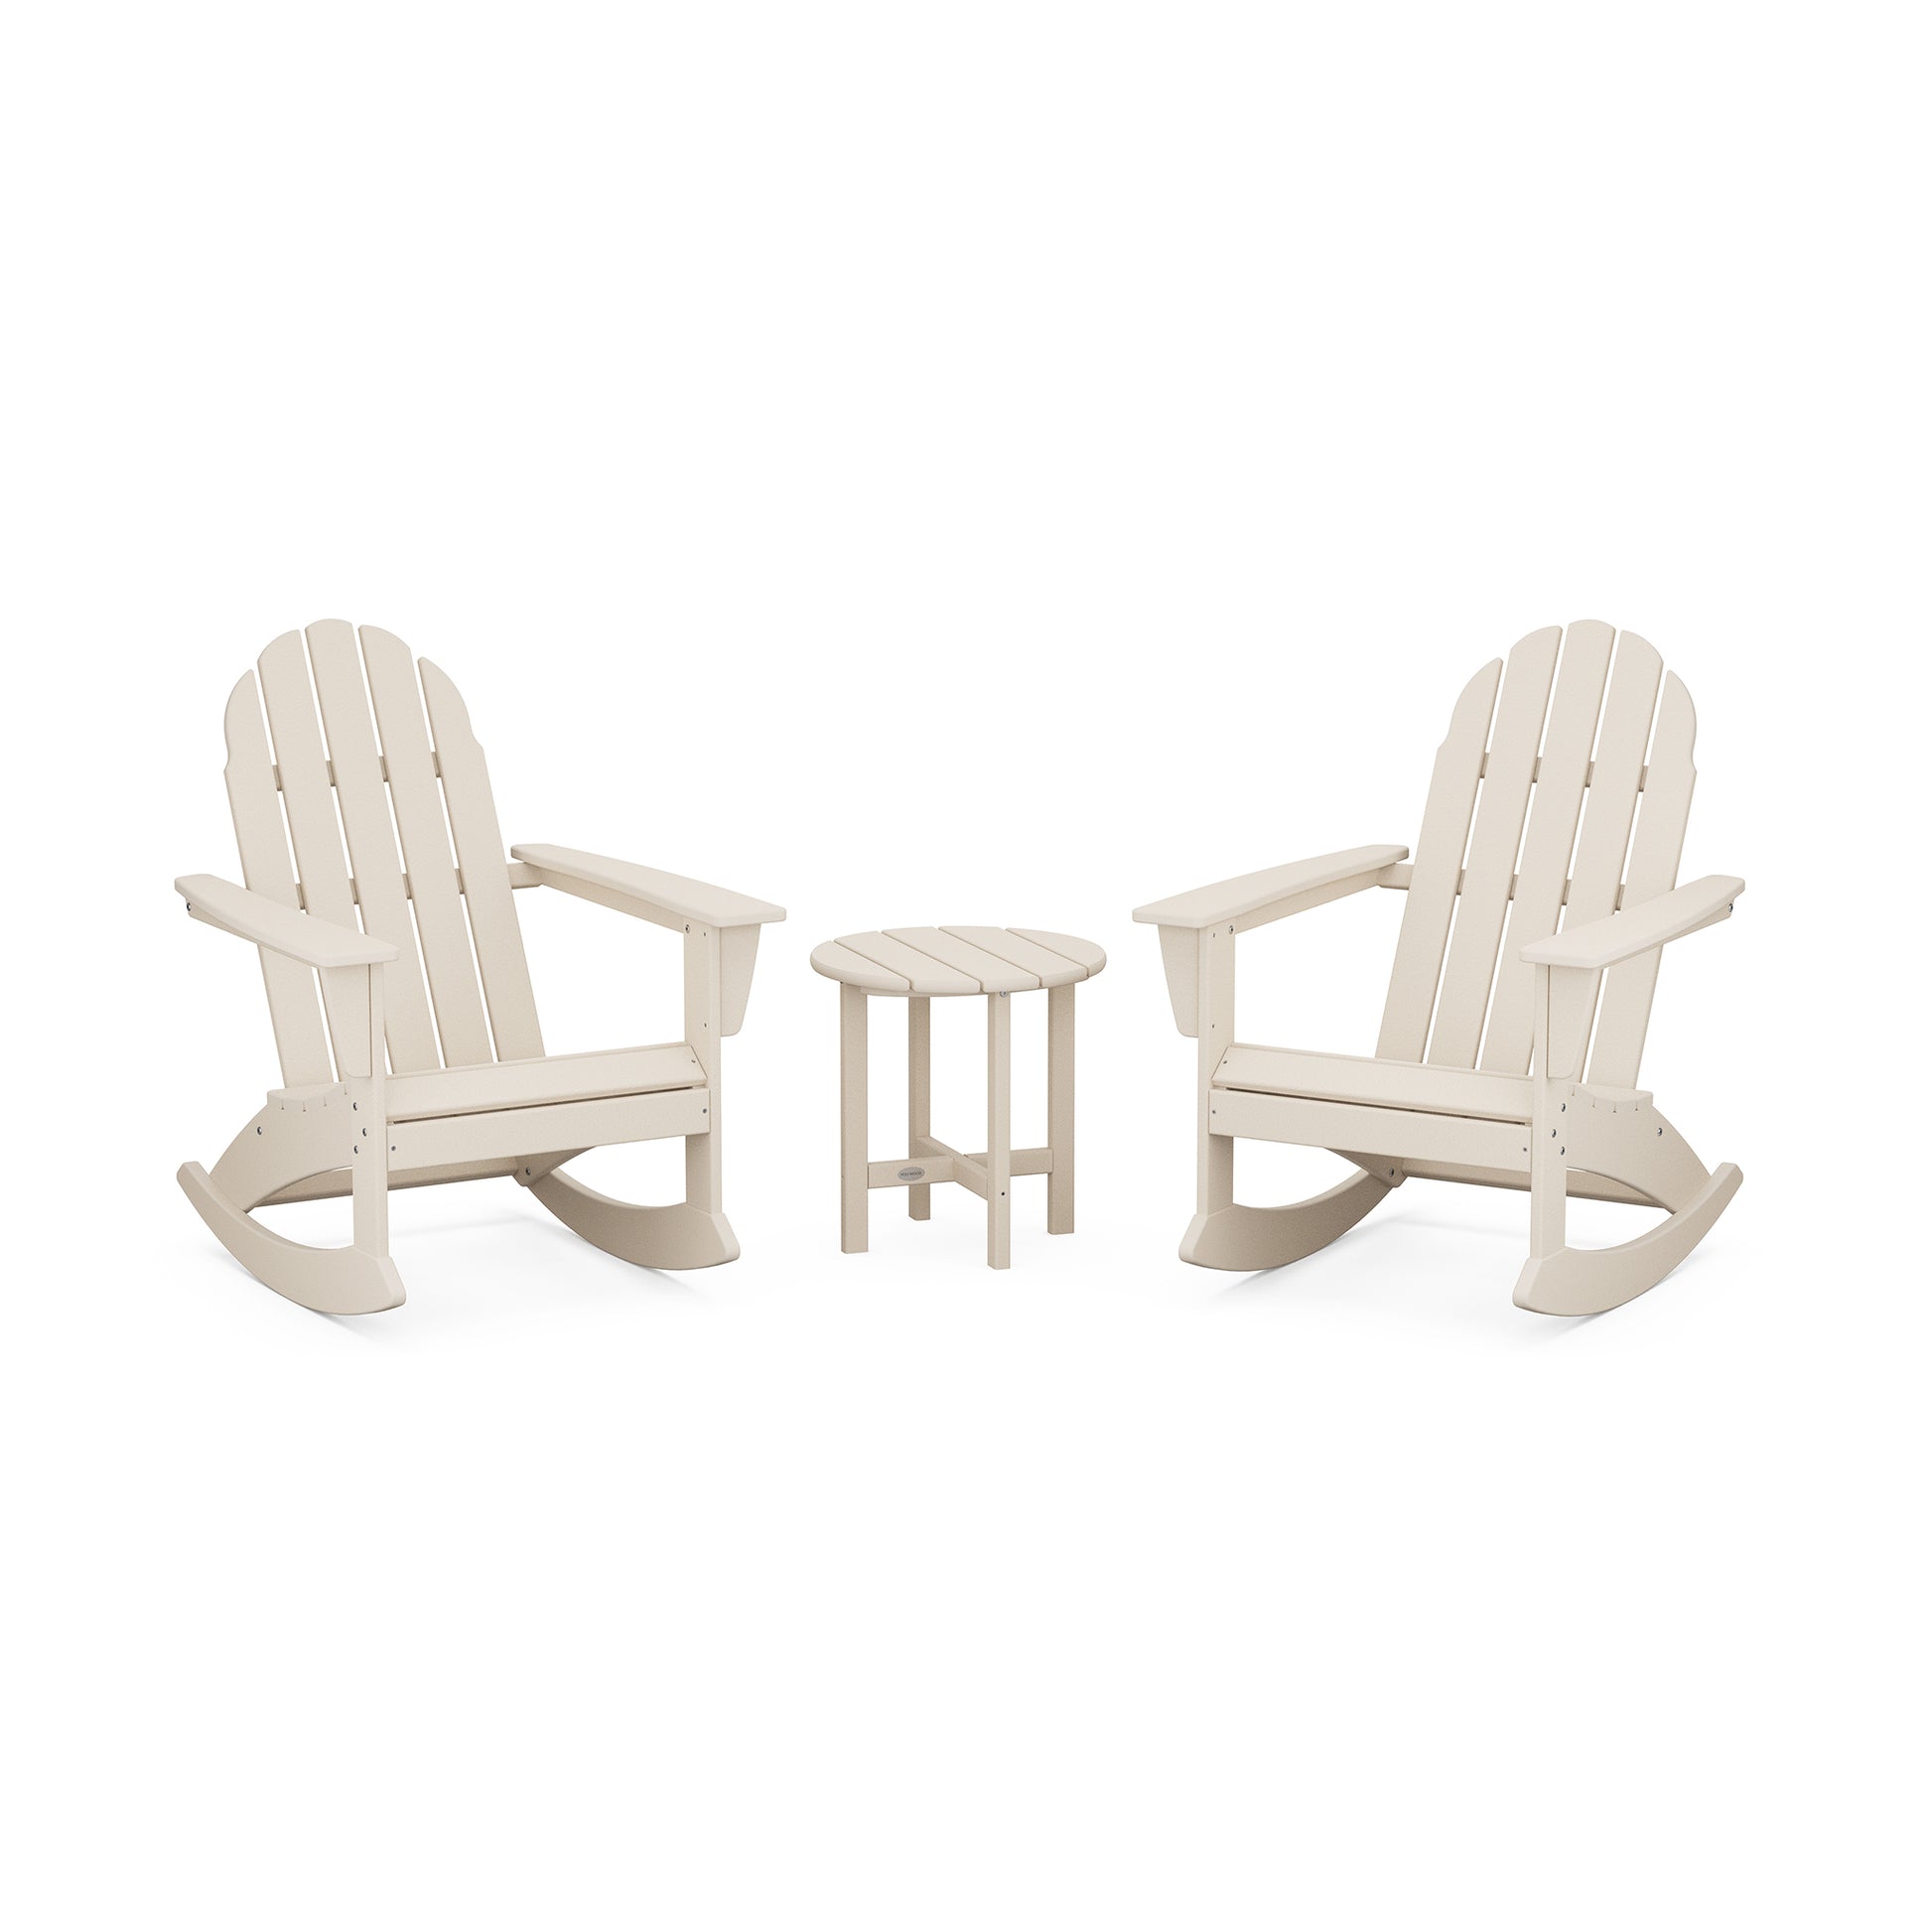 Two beige POLYWOOD Vineyard 3-Piece Adirondack Rocking Chair Sets facing each other with a small round table between them, set against a plain white background.